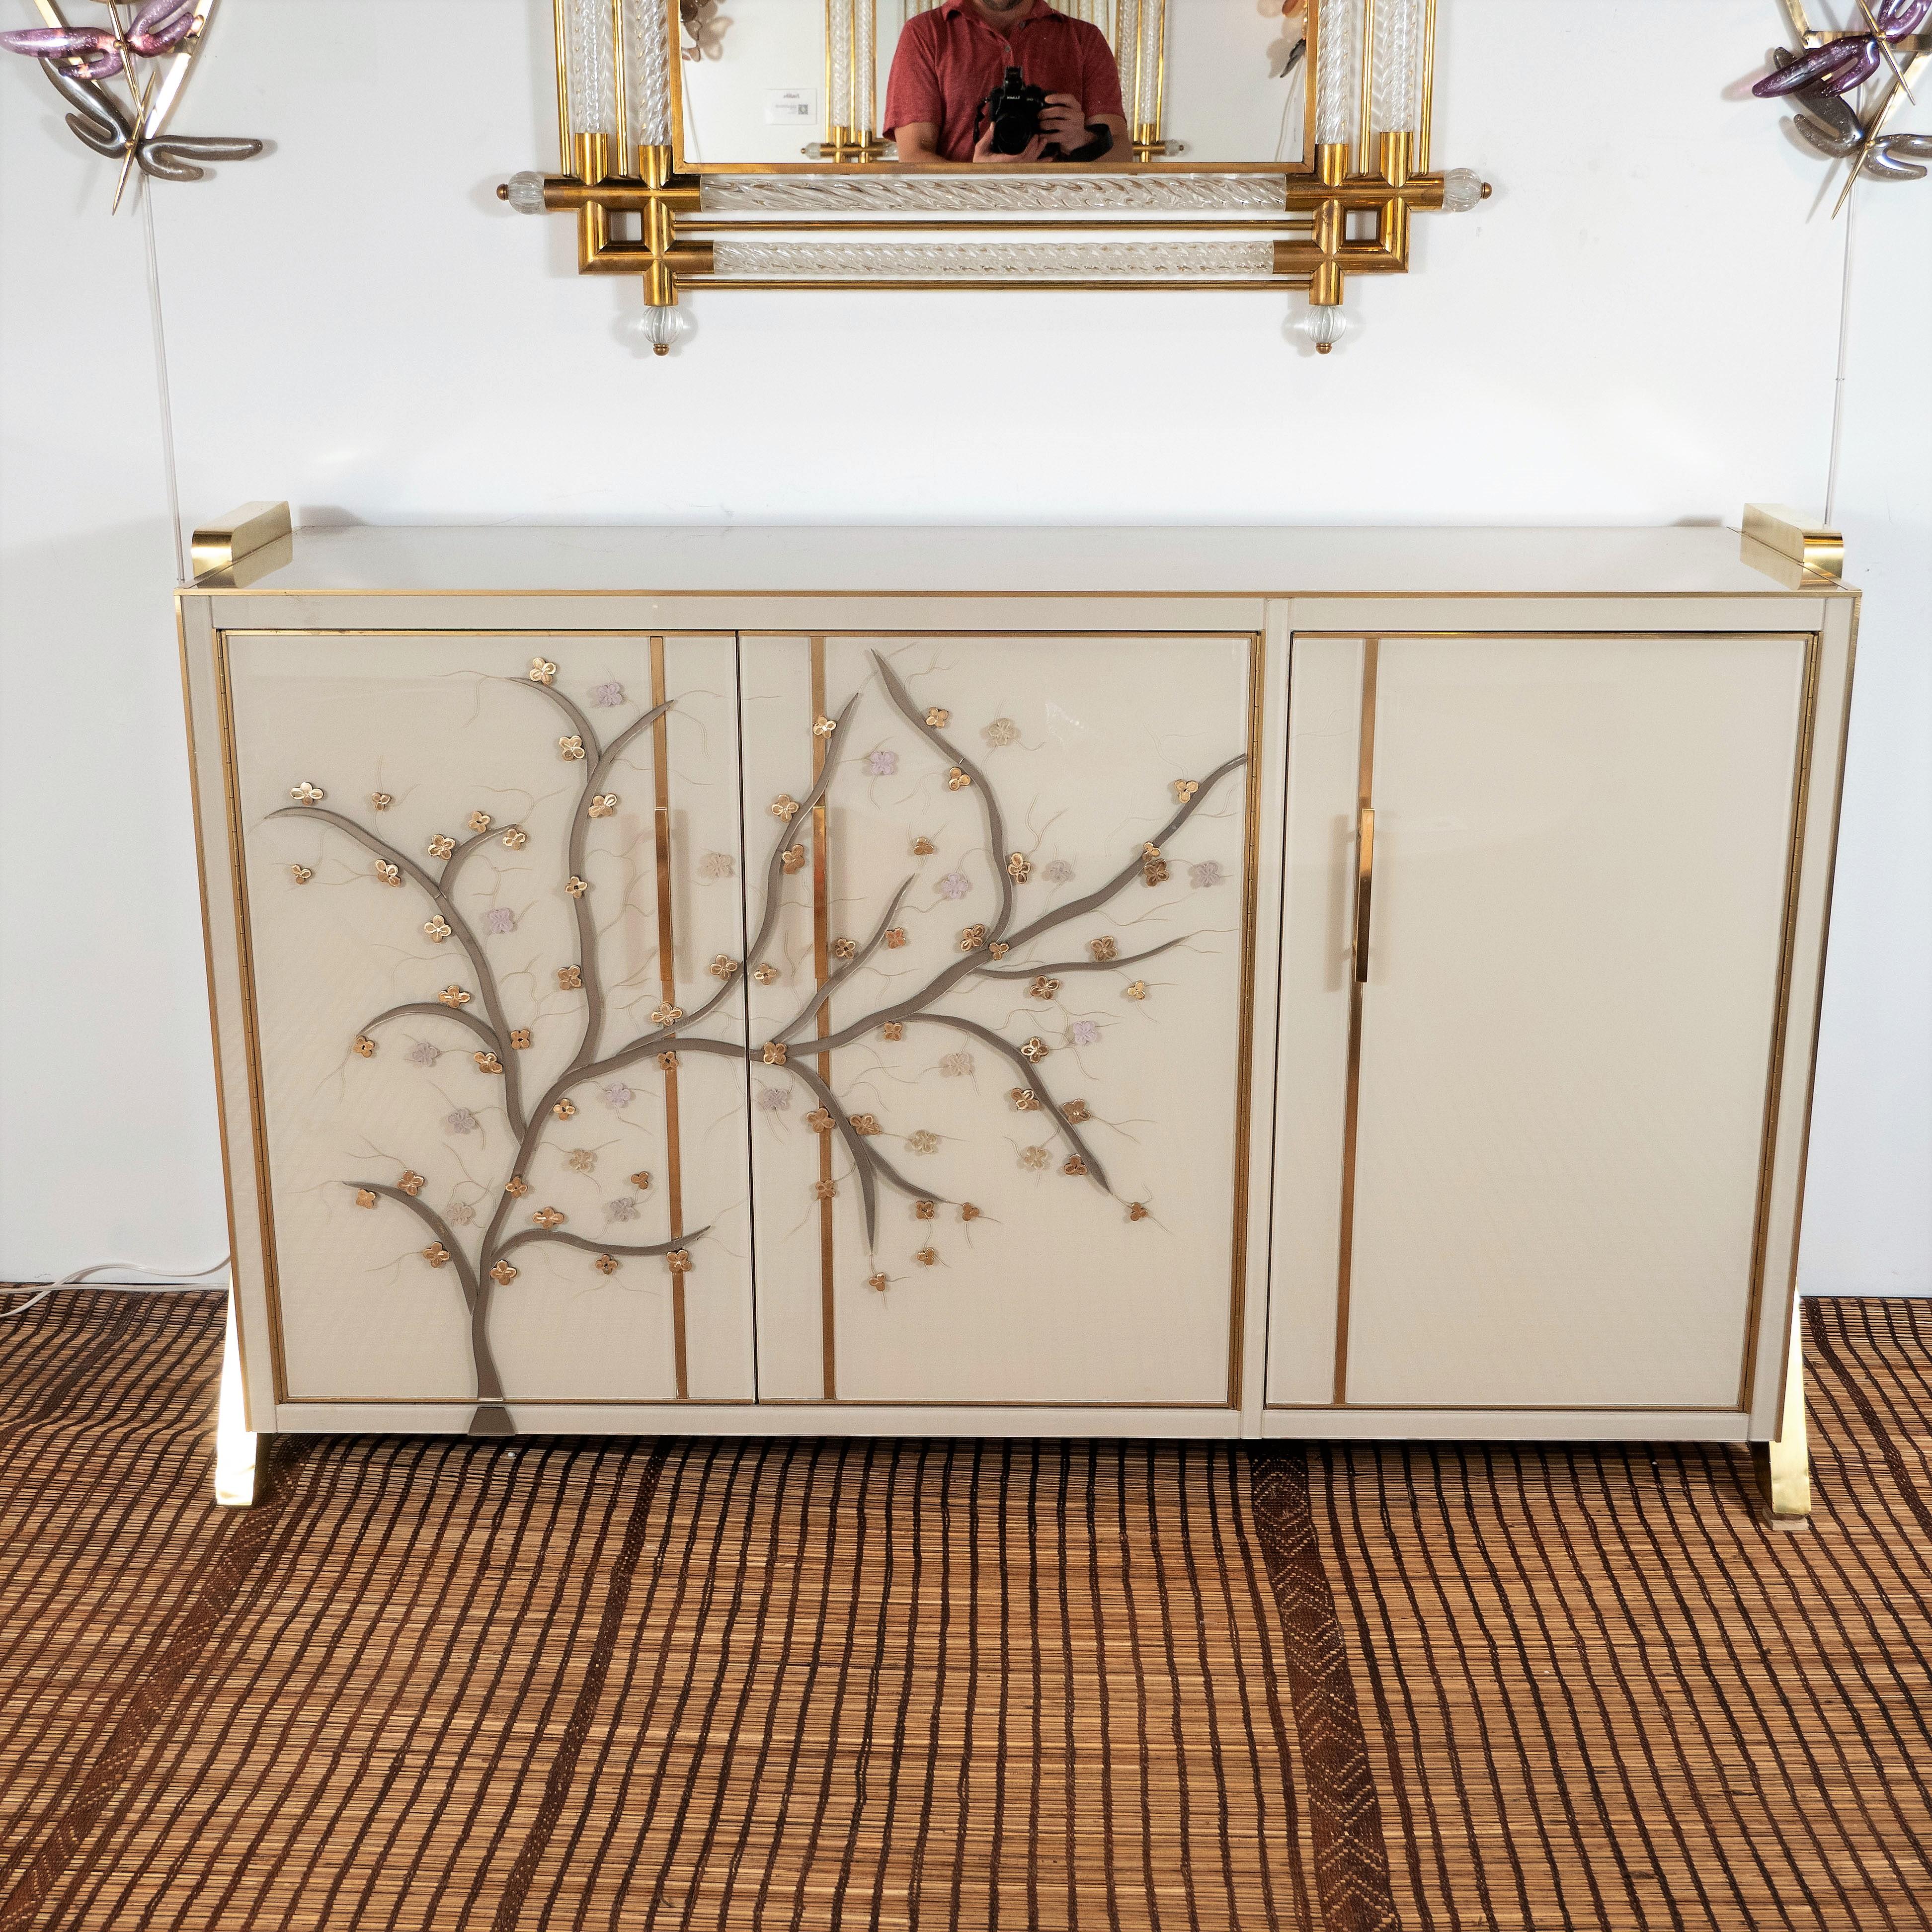 One of a kind sideboard handmade in Venice, Italy by a master artisan and artist. Wooden frame is covered in ivory hand painted Murano glass panels with brass inlays. Handmade and handcut multicolored glass flowers in pearl, lavender and metallic